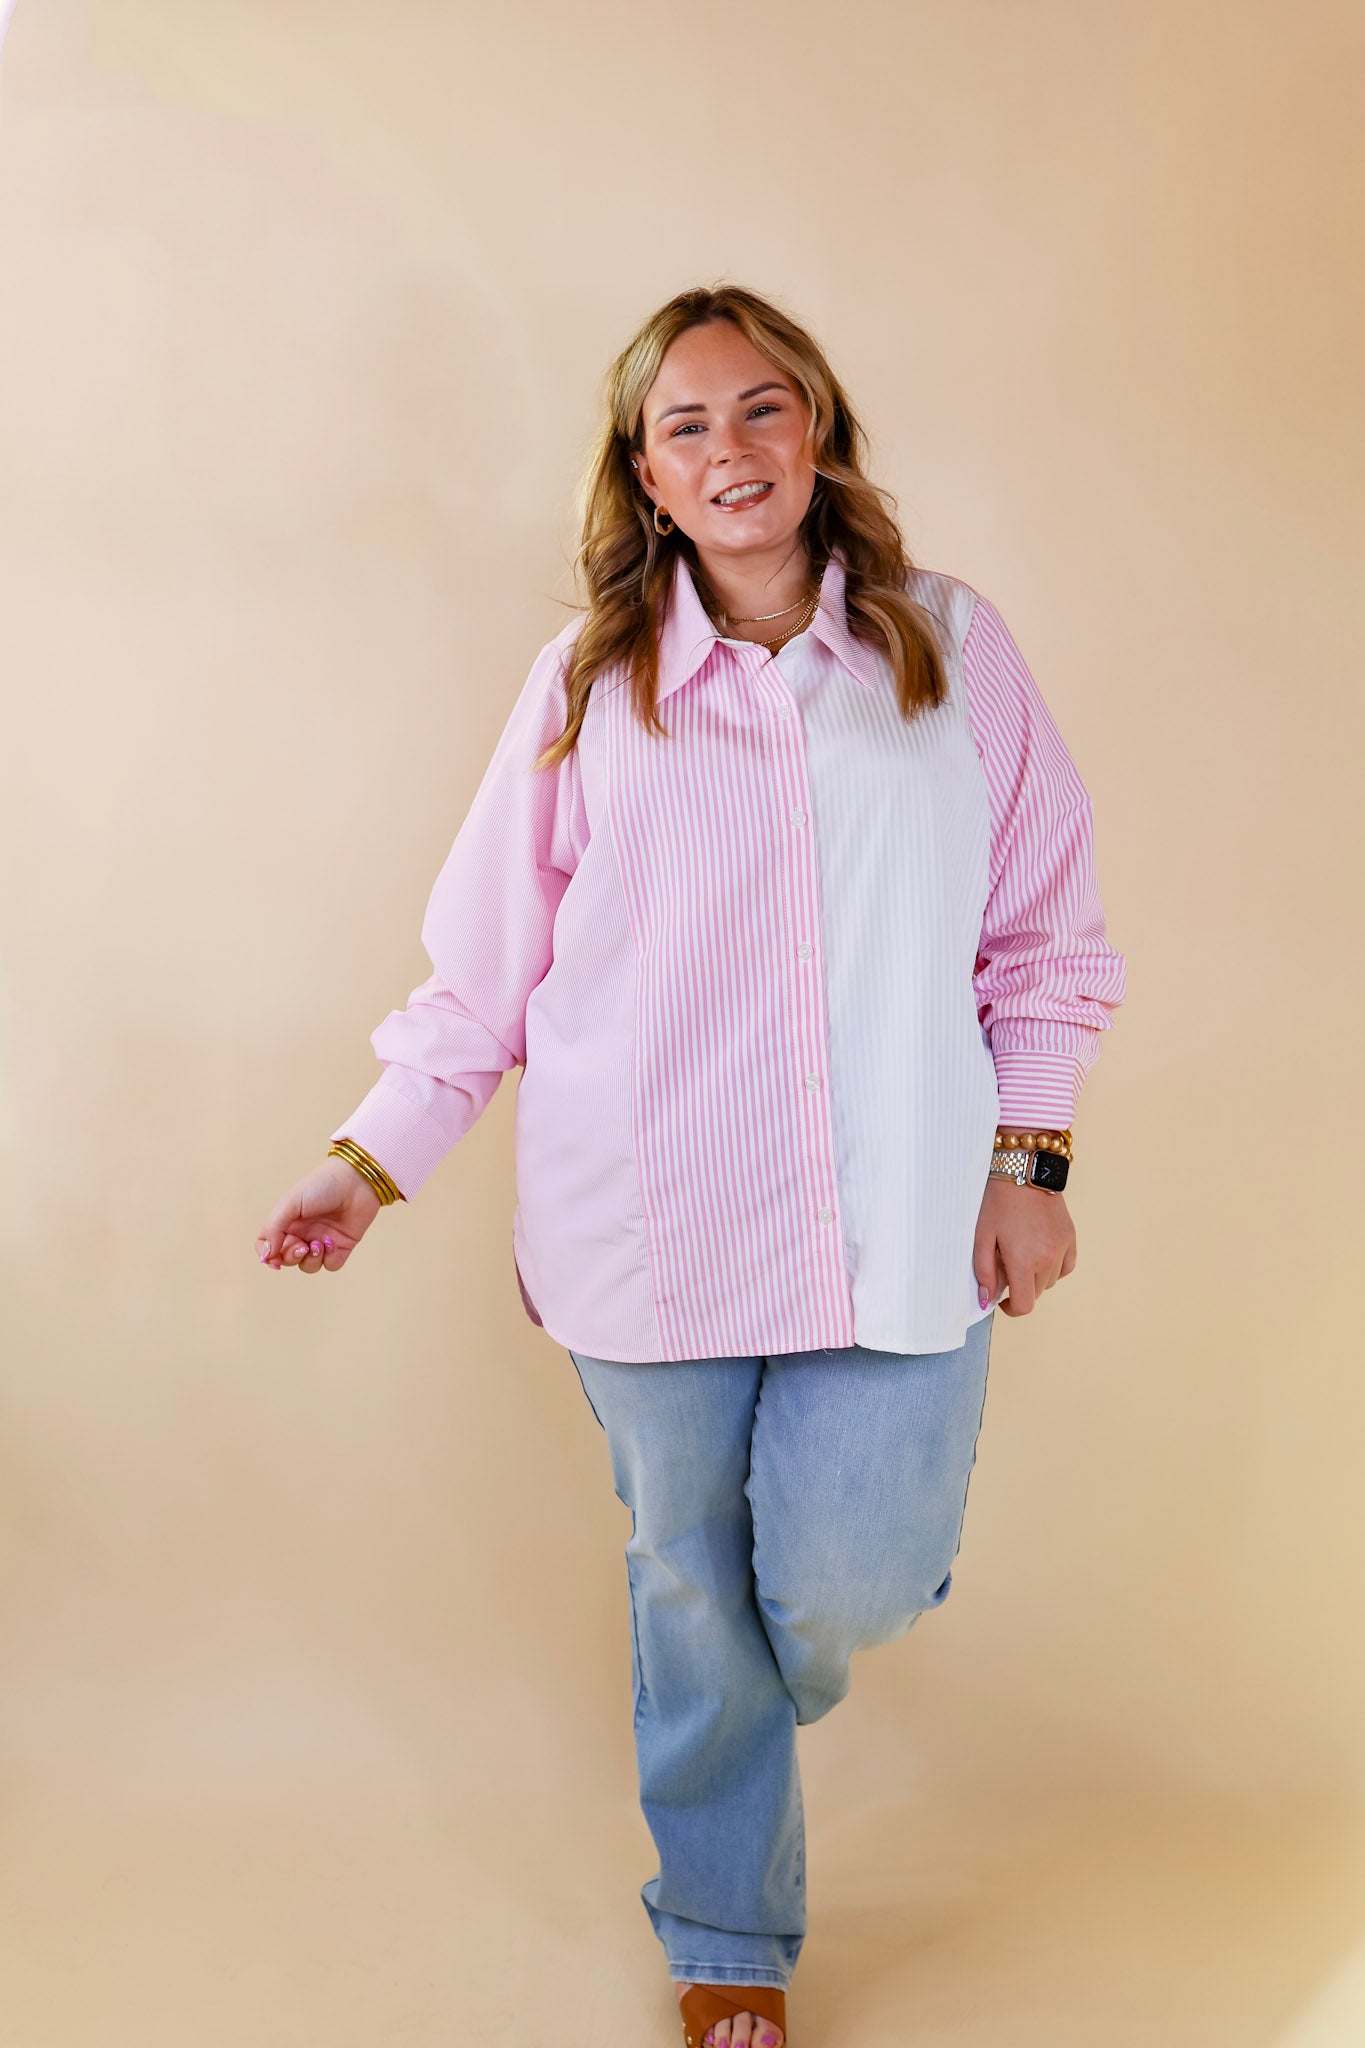 Back To You Pin Stripe Color Block Button Up Top in Pink and White - Giddy Up Glamour Boutique